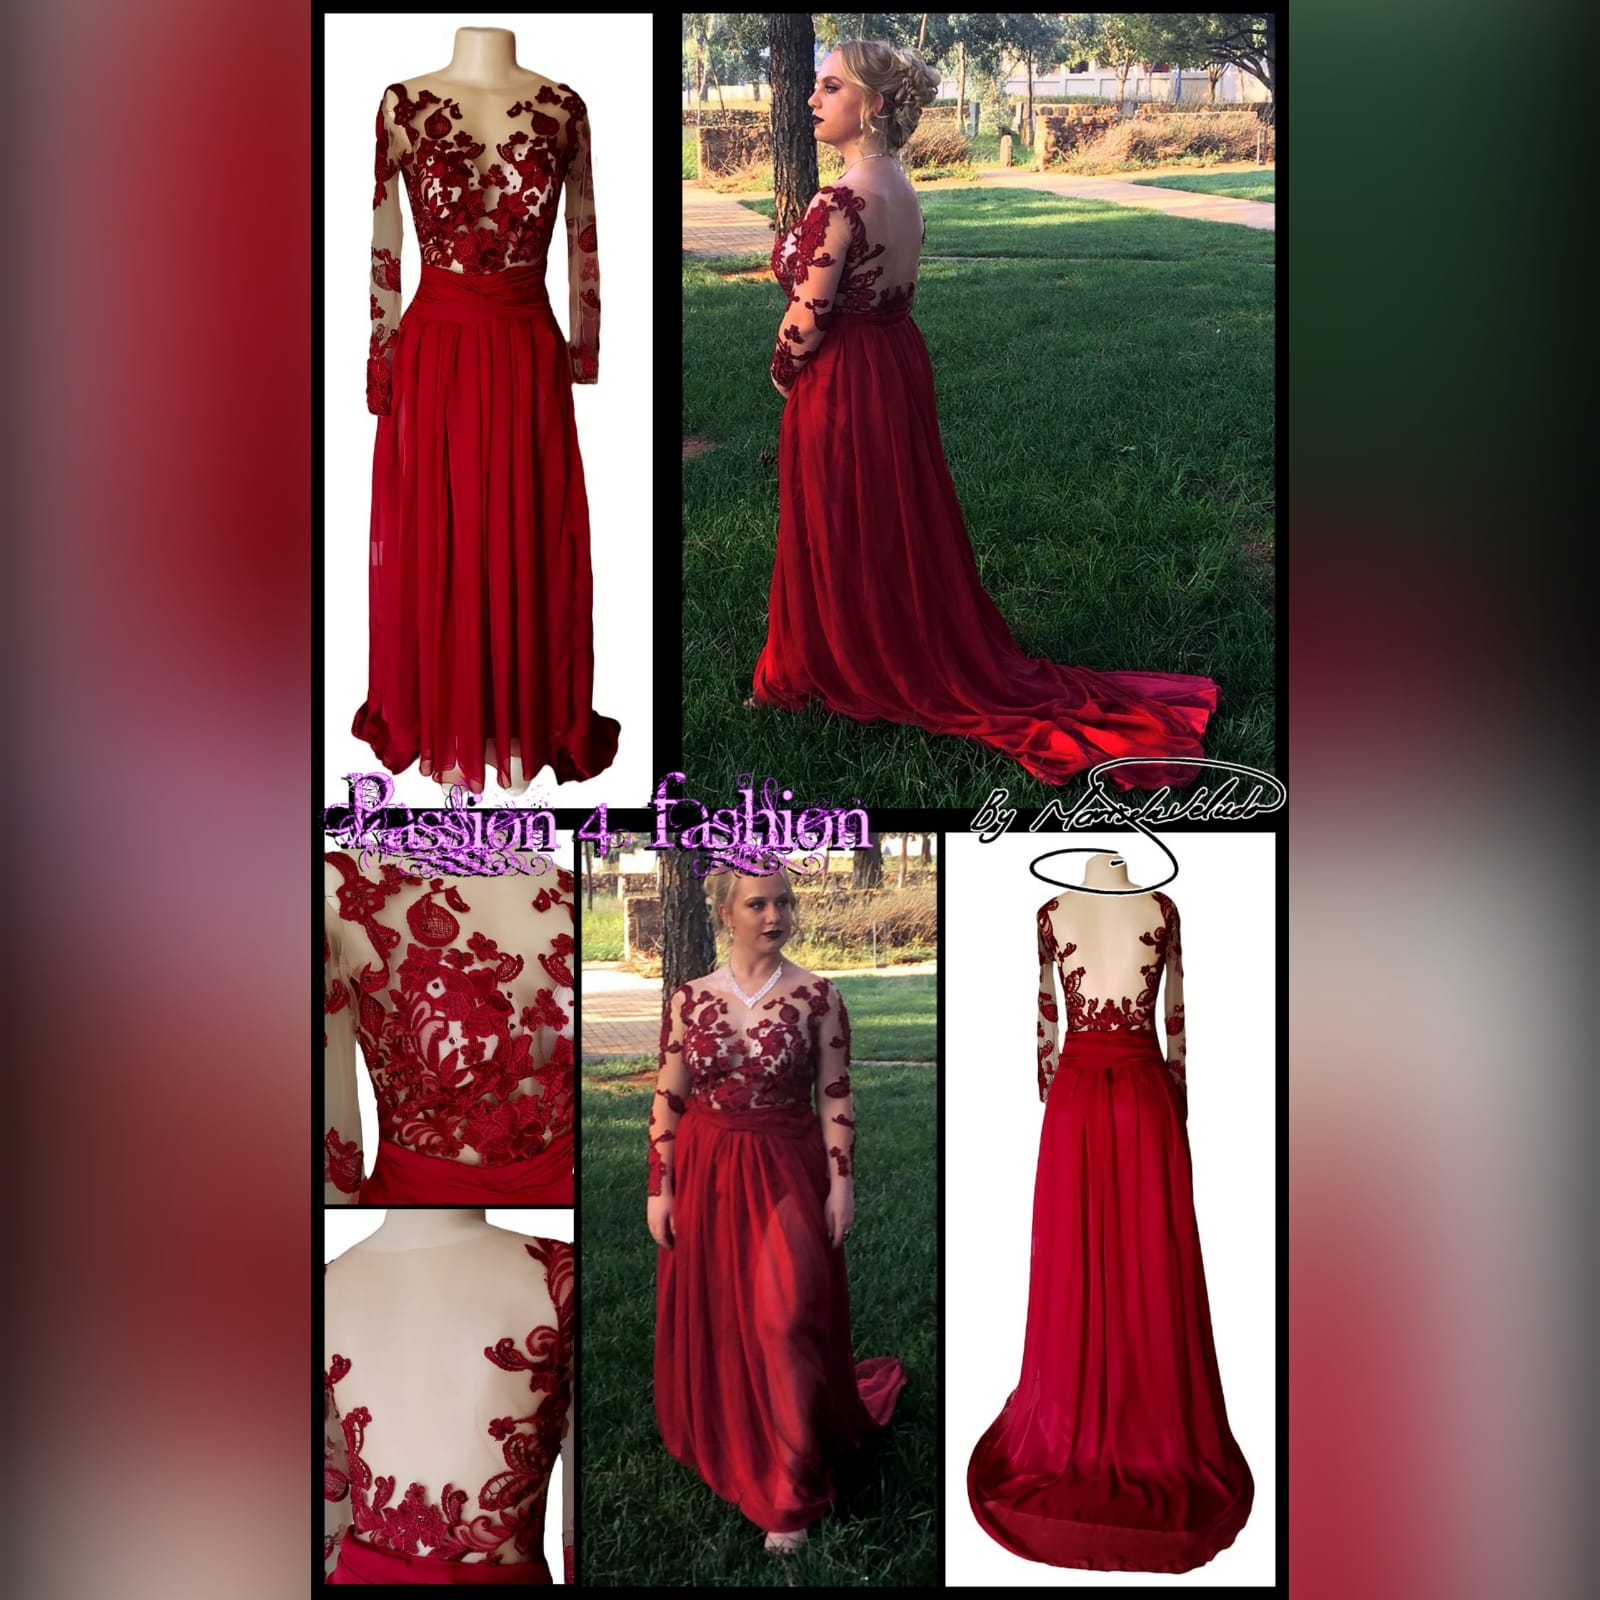 Red lace and chiffon prom dress 2 red lace and chiffon prom dress with an illusion lace bodice, illusion open back and sleeves detailed with lace and beads. A gathered chiffon bottom with a ruched belt a sheer slit and a train.